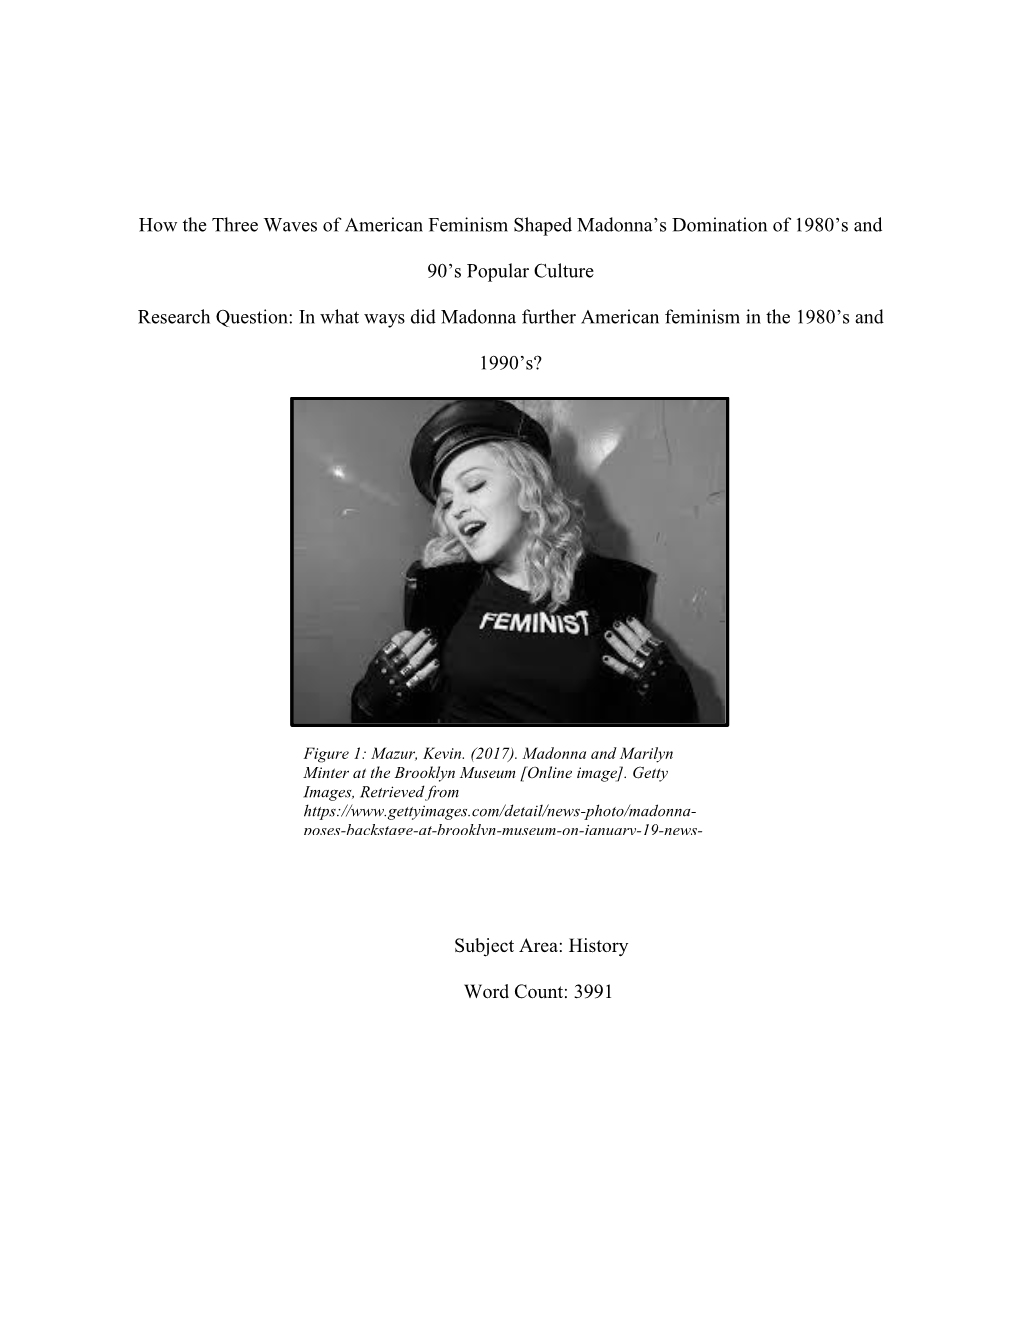 How the Three Waves of American Feminism Shaped Madonna's